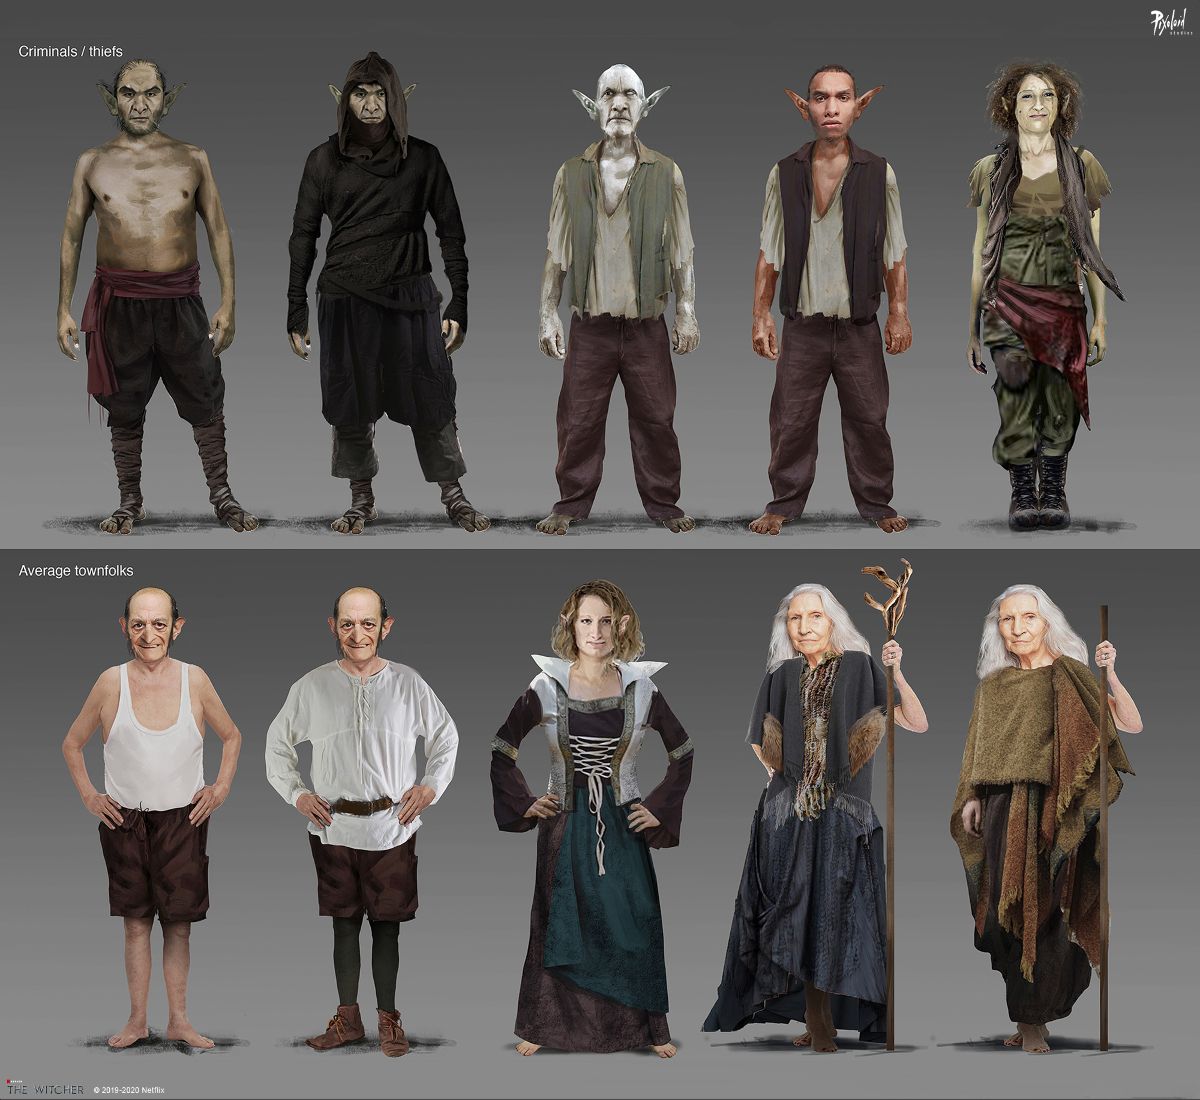 Concept art for goblins by Pixoloid Studios for The Witcher series on Netflix